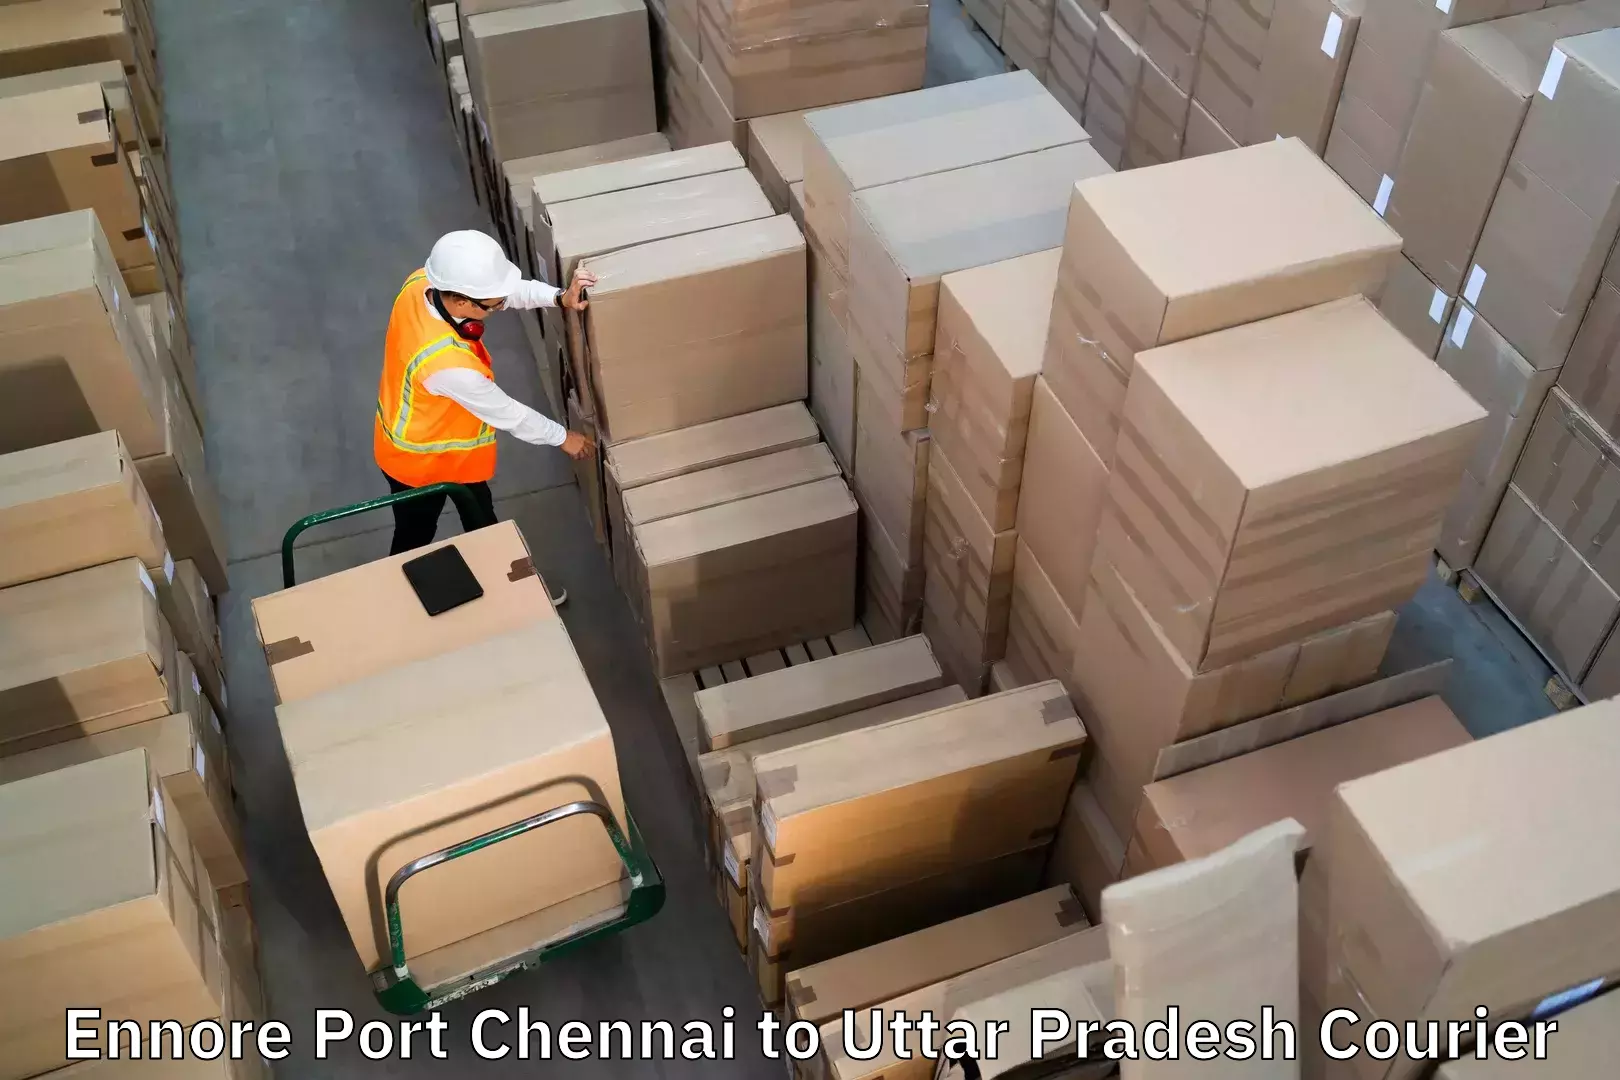 Baggage delivery technology Ennore Port Chennai to Sultanpur Avadh